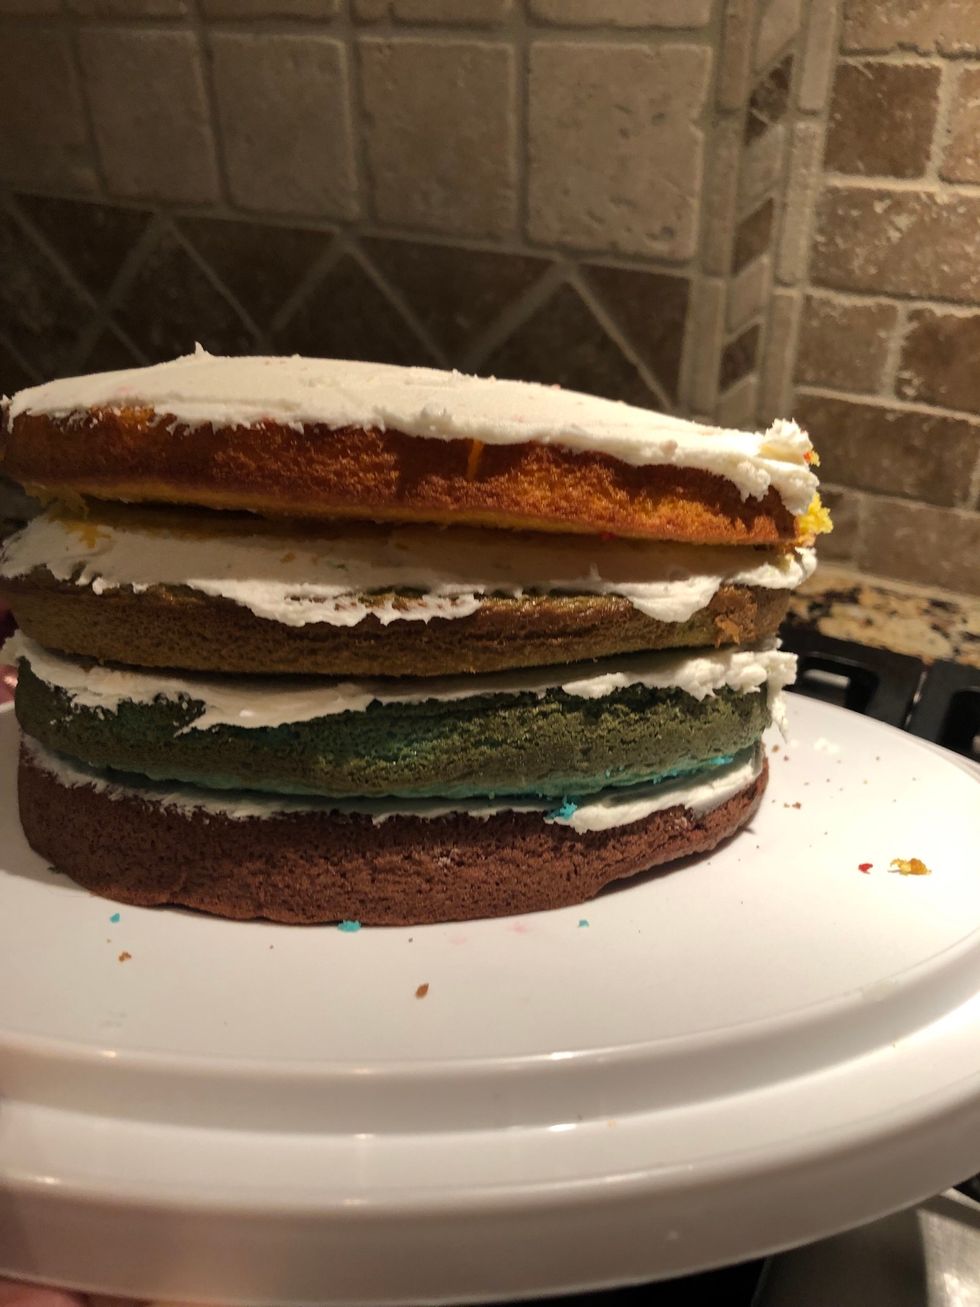 Put icing on top of the yellow layer until fully covered.